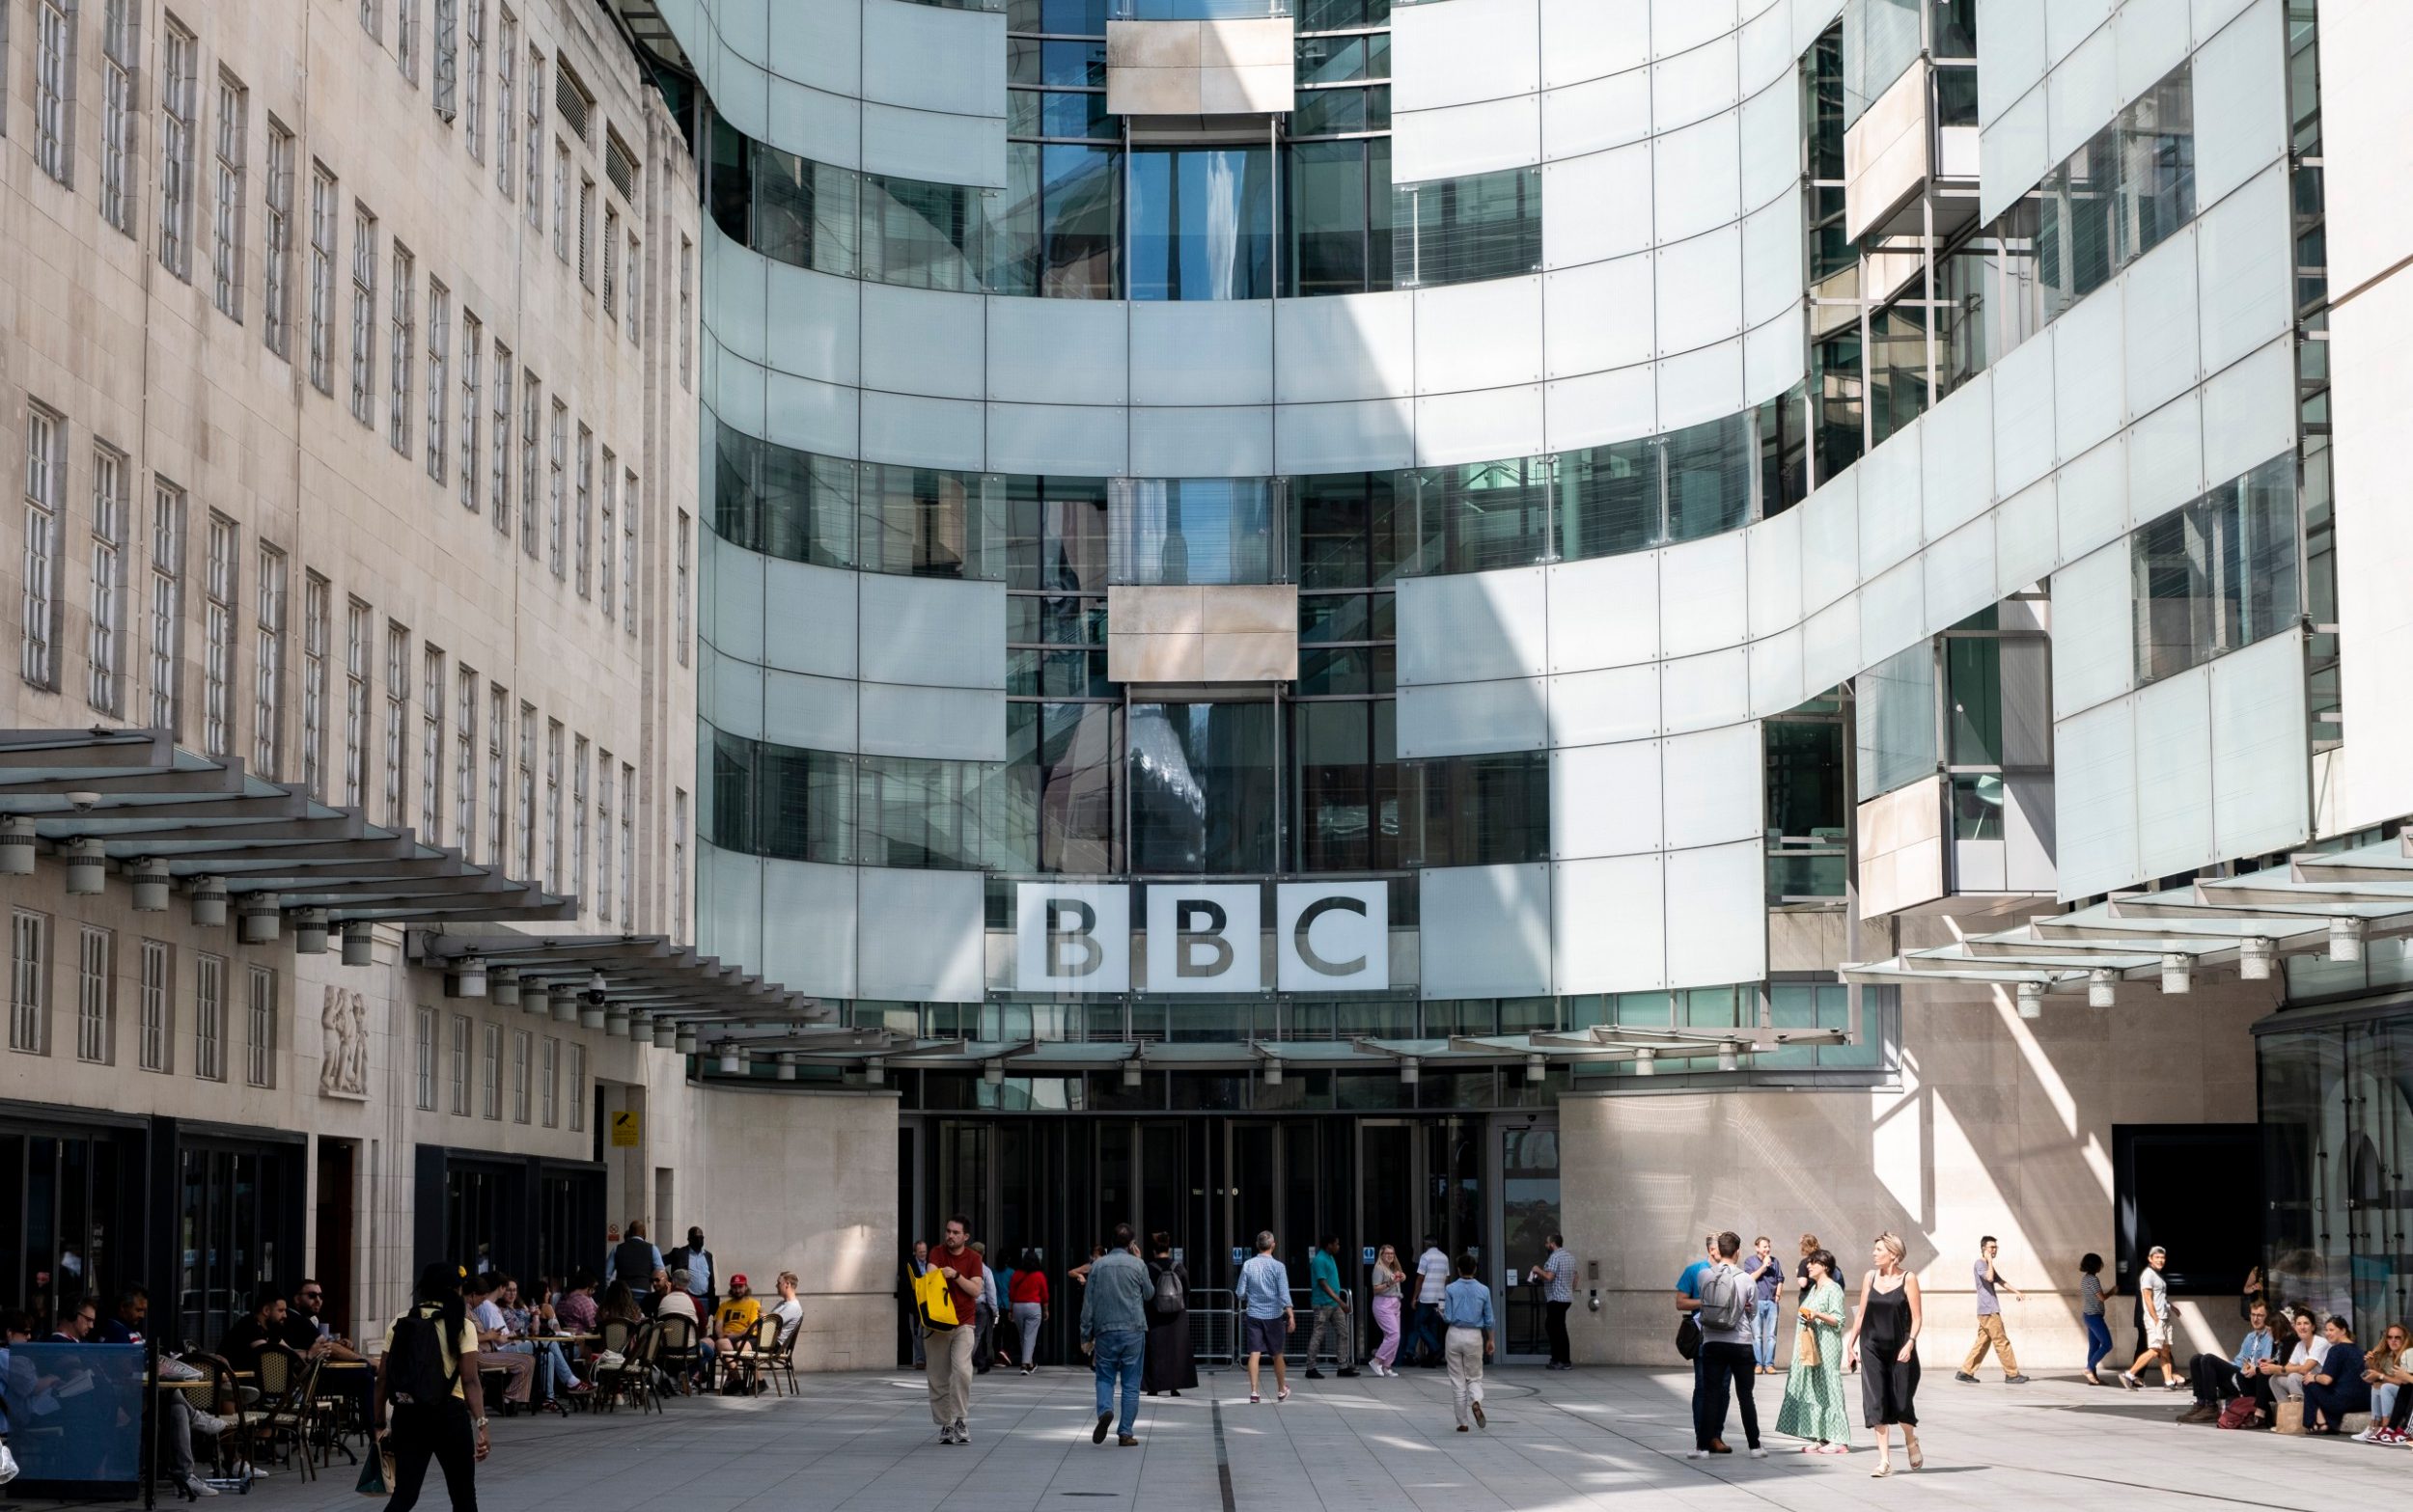 radio 4 ‘would face 50pc funding cut’ if bbc ditched licence fee for advertising model